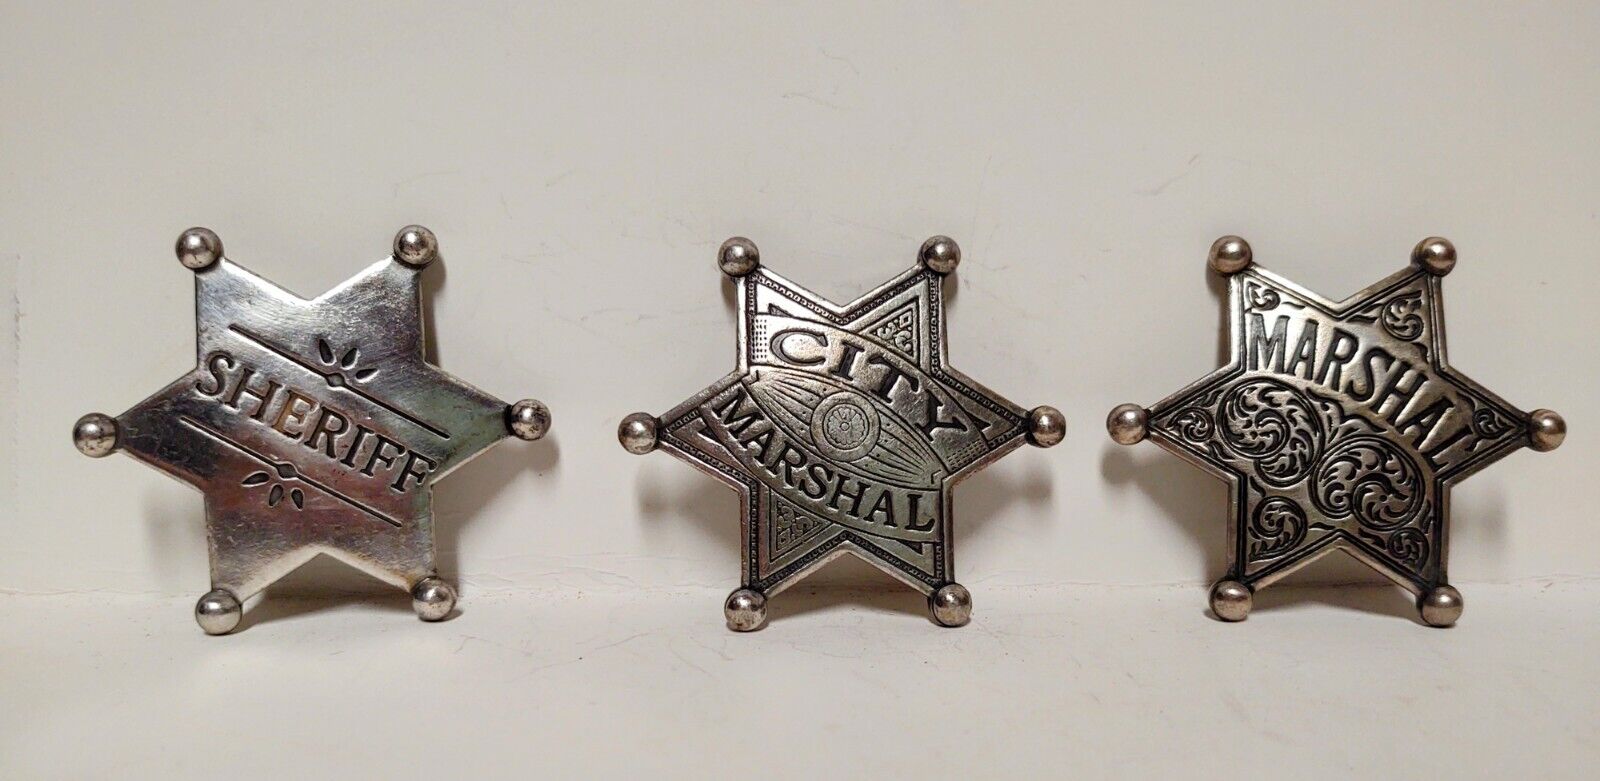 3 Vintage City Marshal - Marshal - Sheriff Badges Will not adhere to Magnet